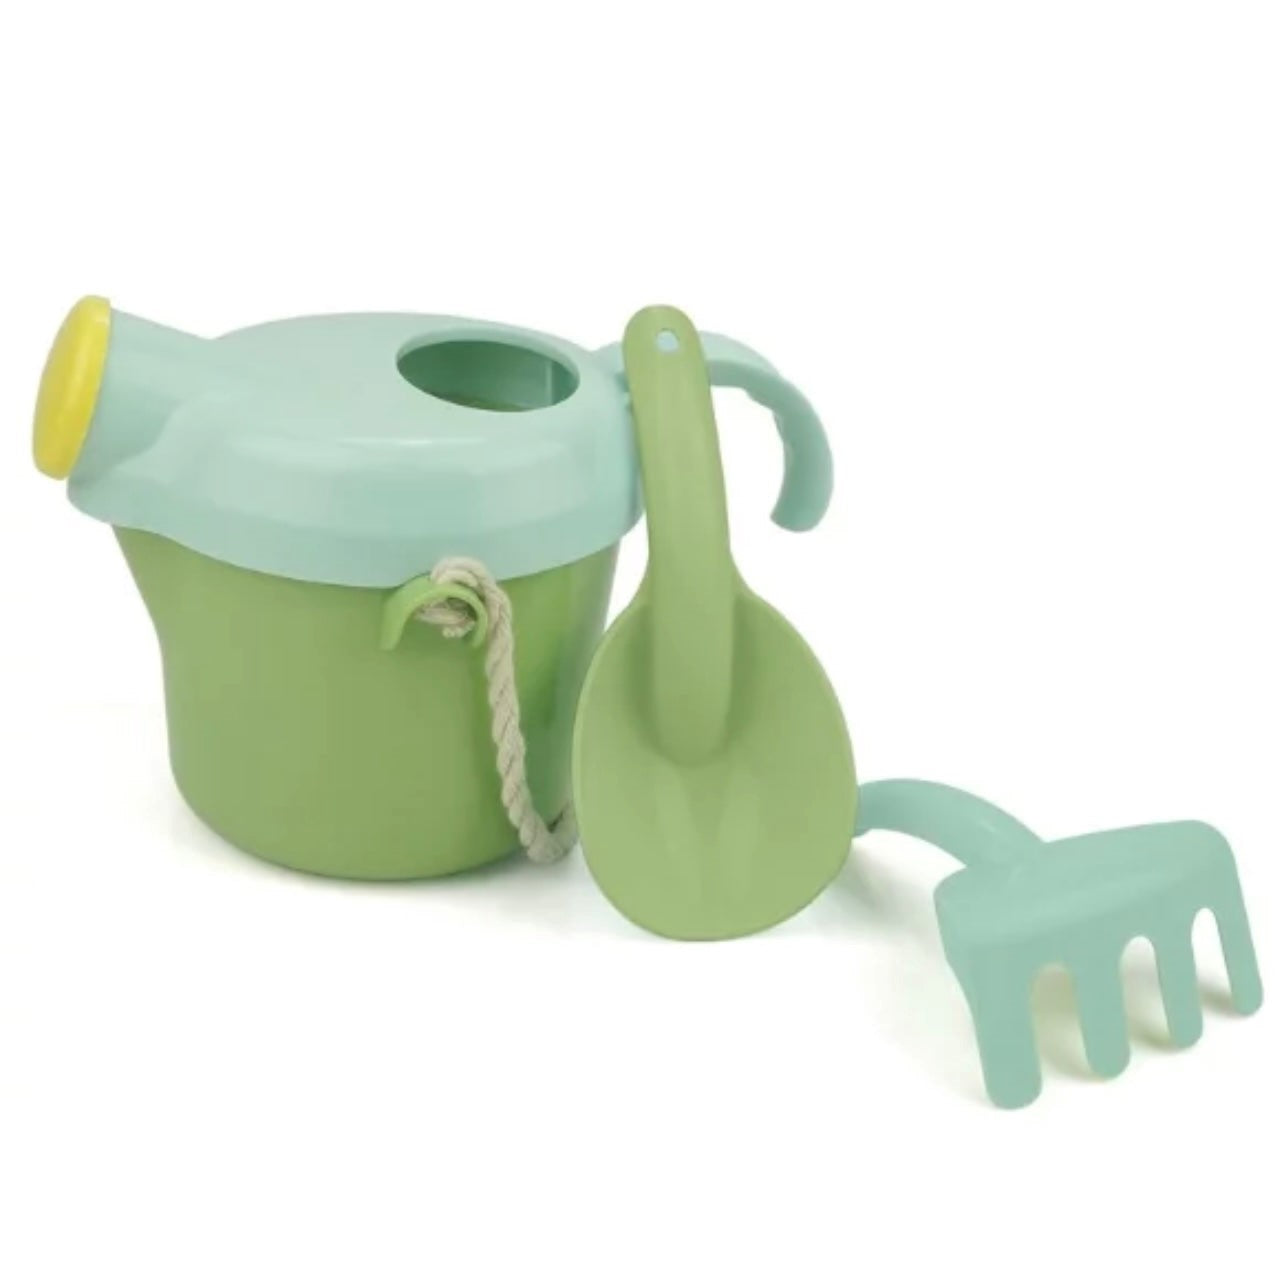 VIKING TOYS Ecoline Watering can with tool